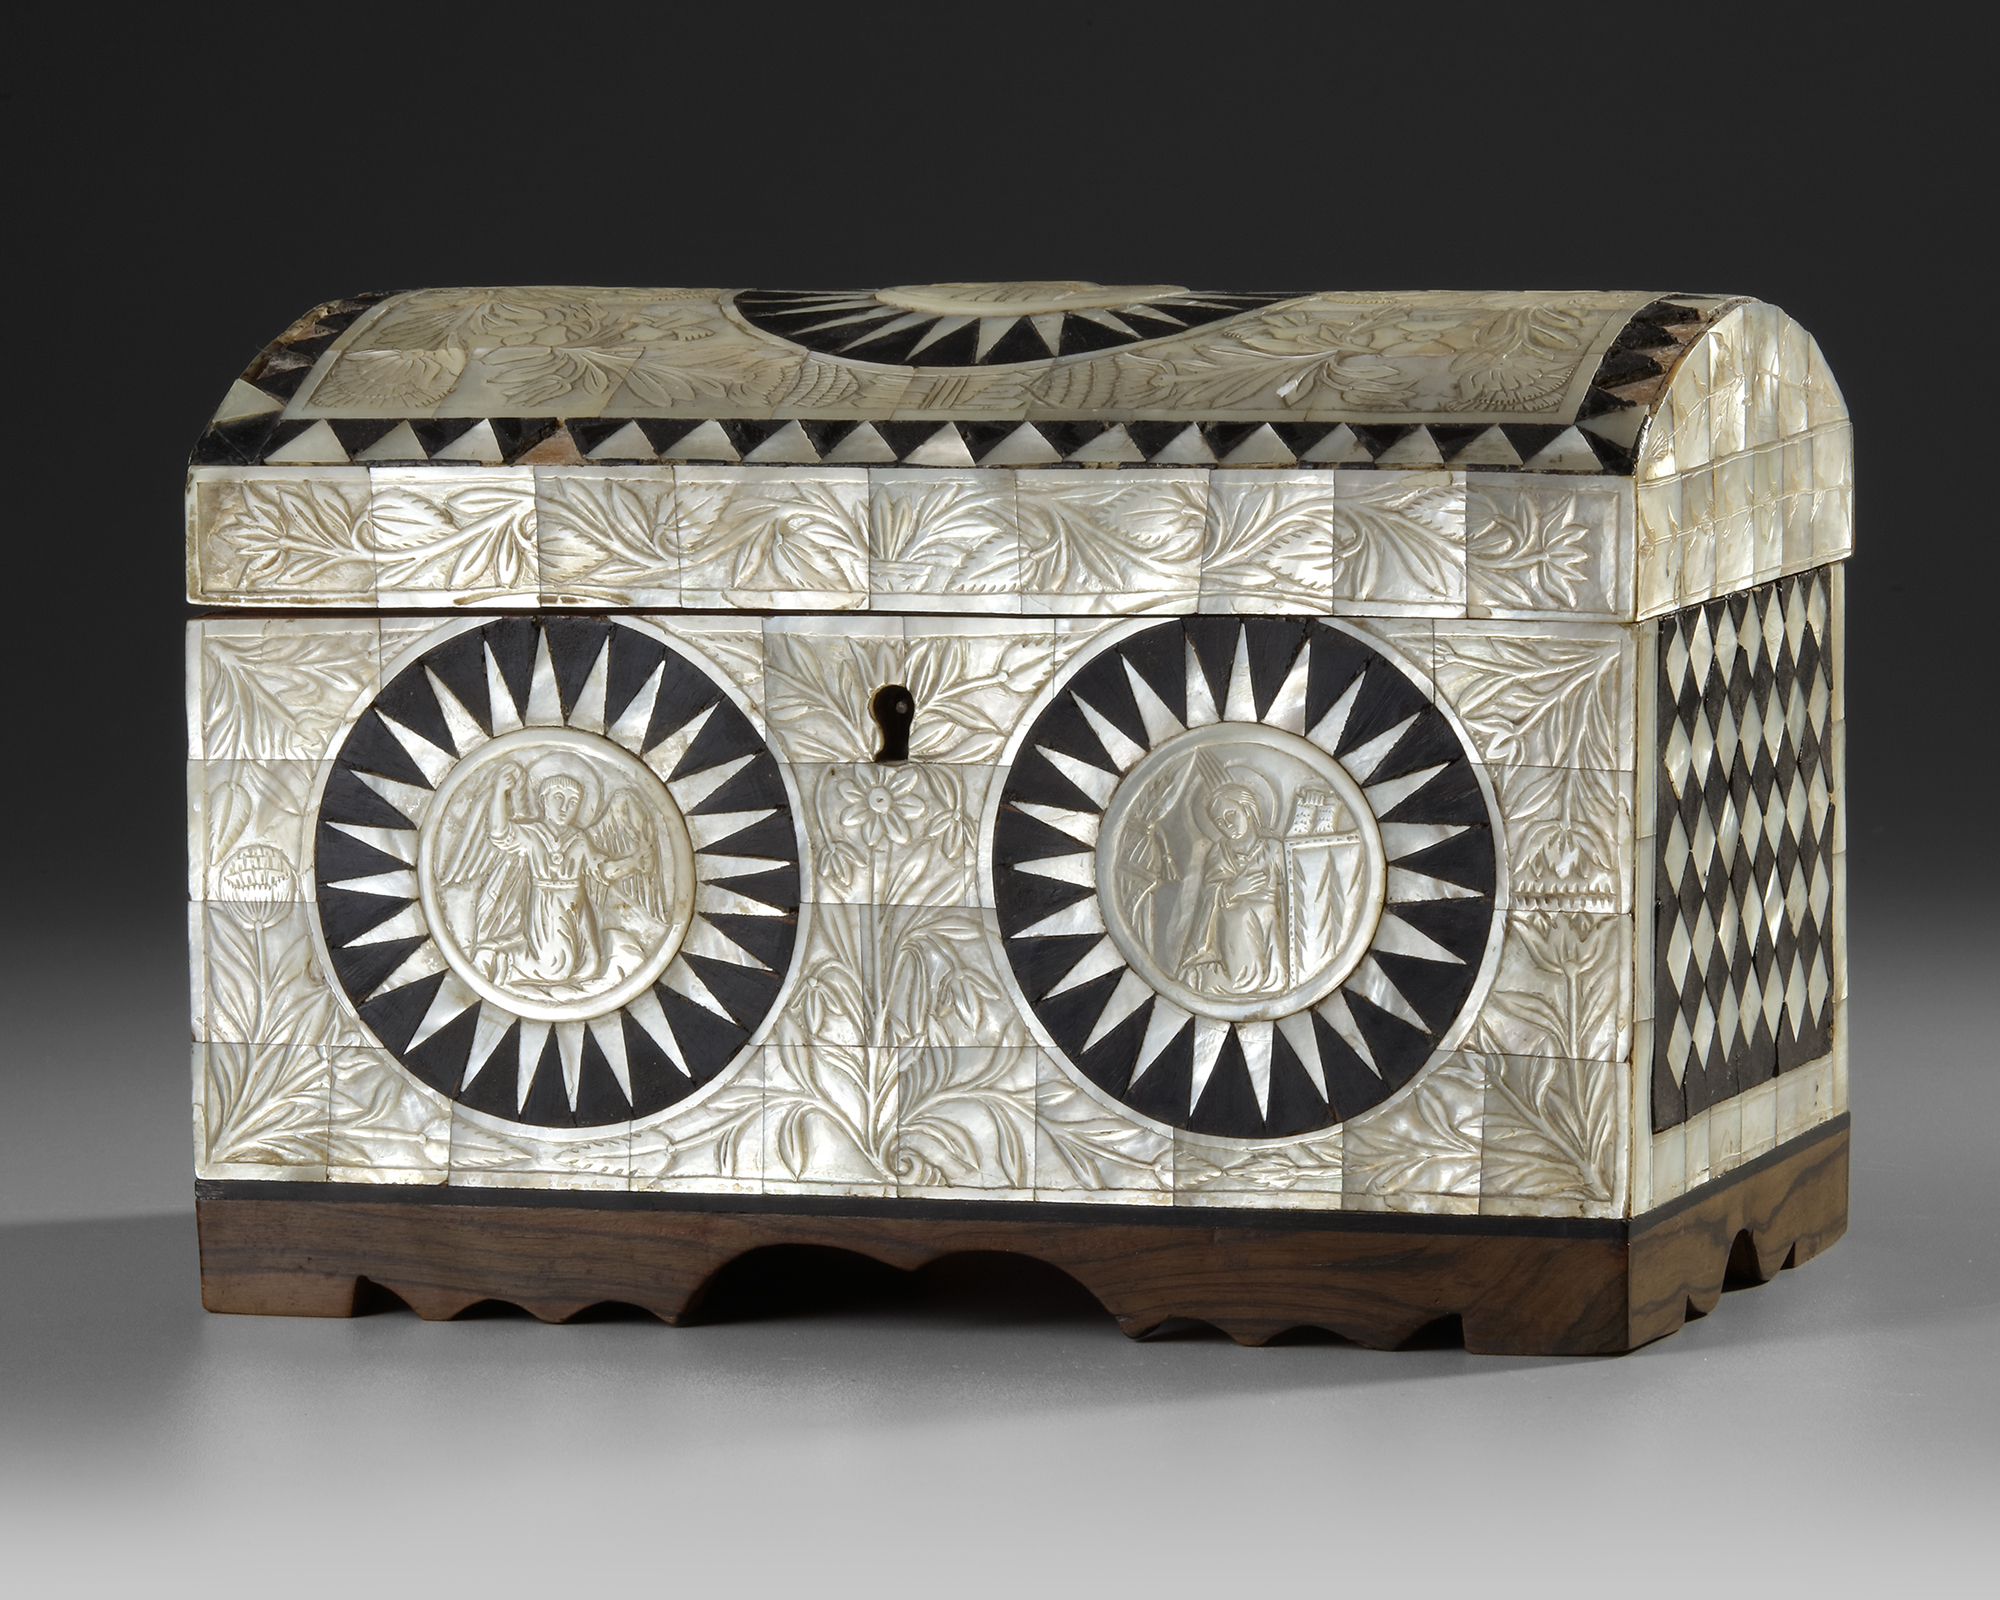 AN OTTOMAN MOTHER OF PEARL INLAID WOODEN BOX, TURKEY PROVINCES, 19TH CENTURY